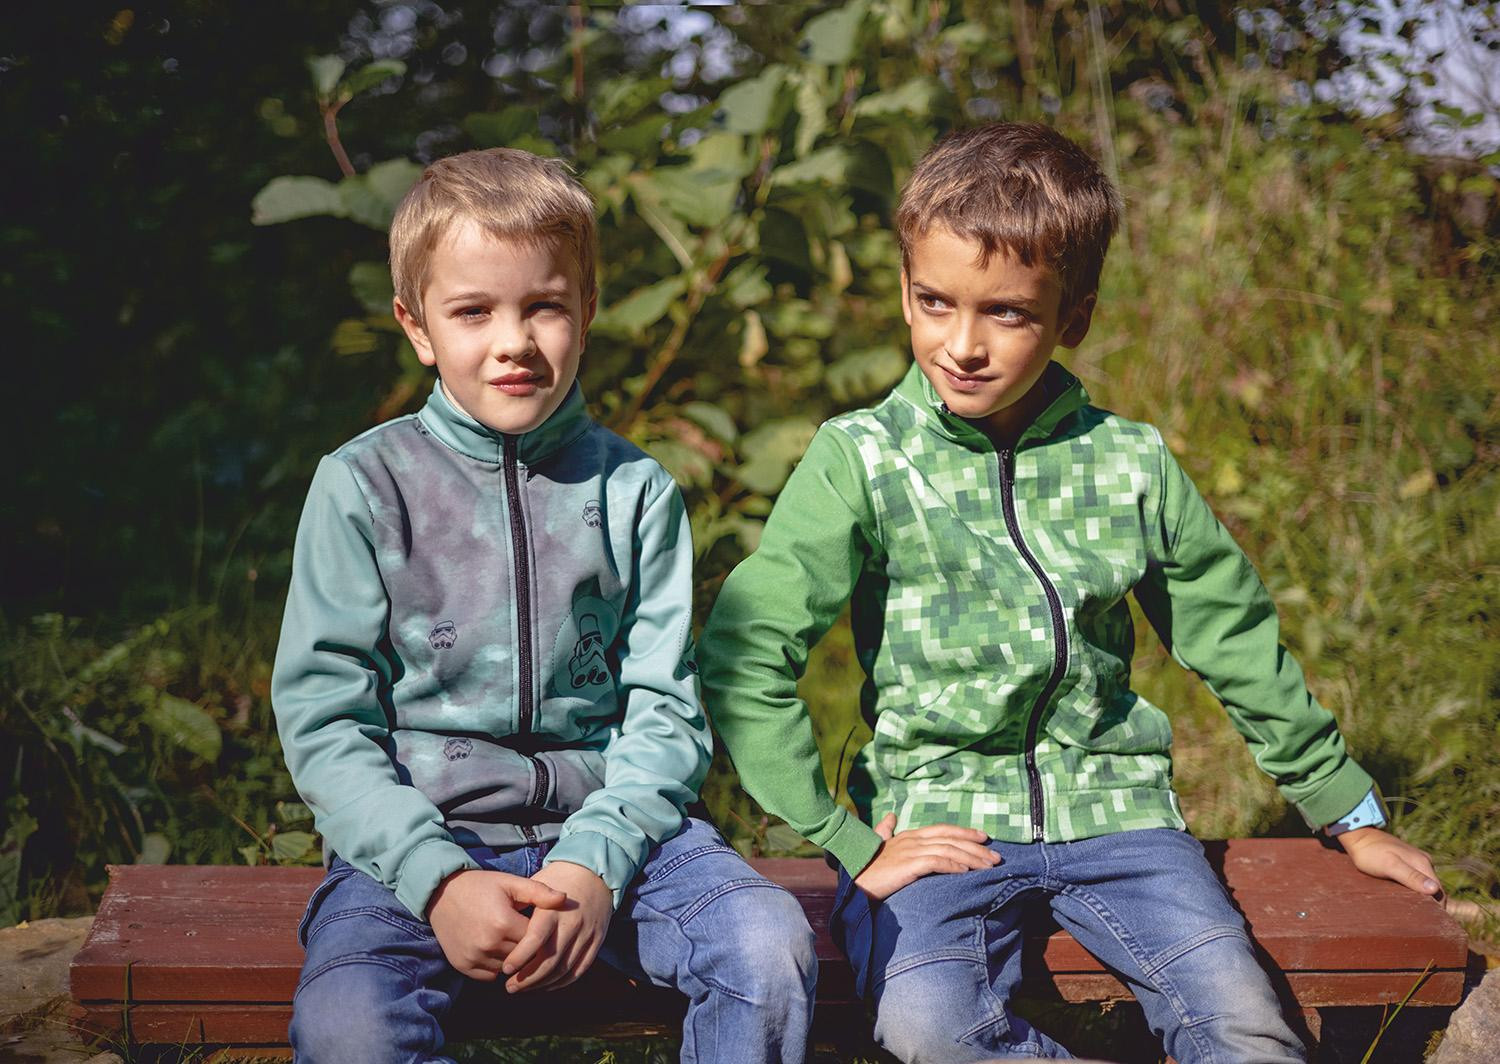 "MAX" CHILDREN'S TRAINING JACKET - WATERCOLOR GALAXY PAT. 9 - knit with short nap